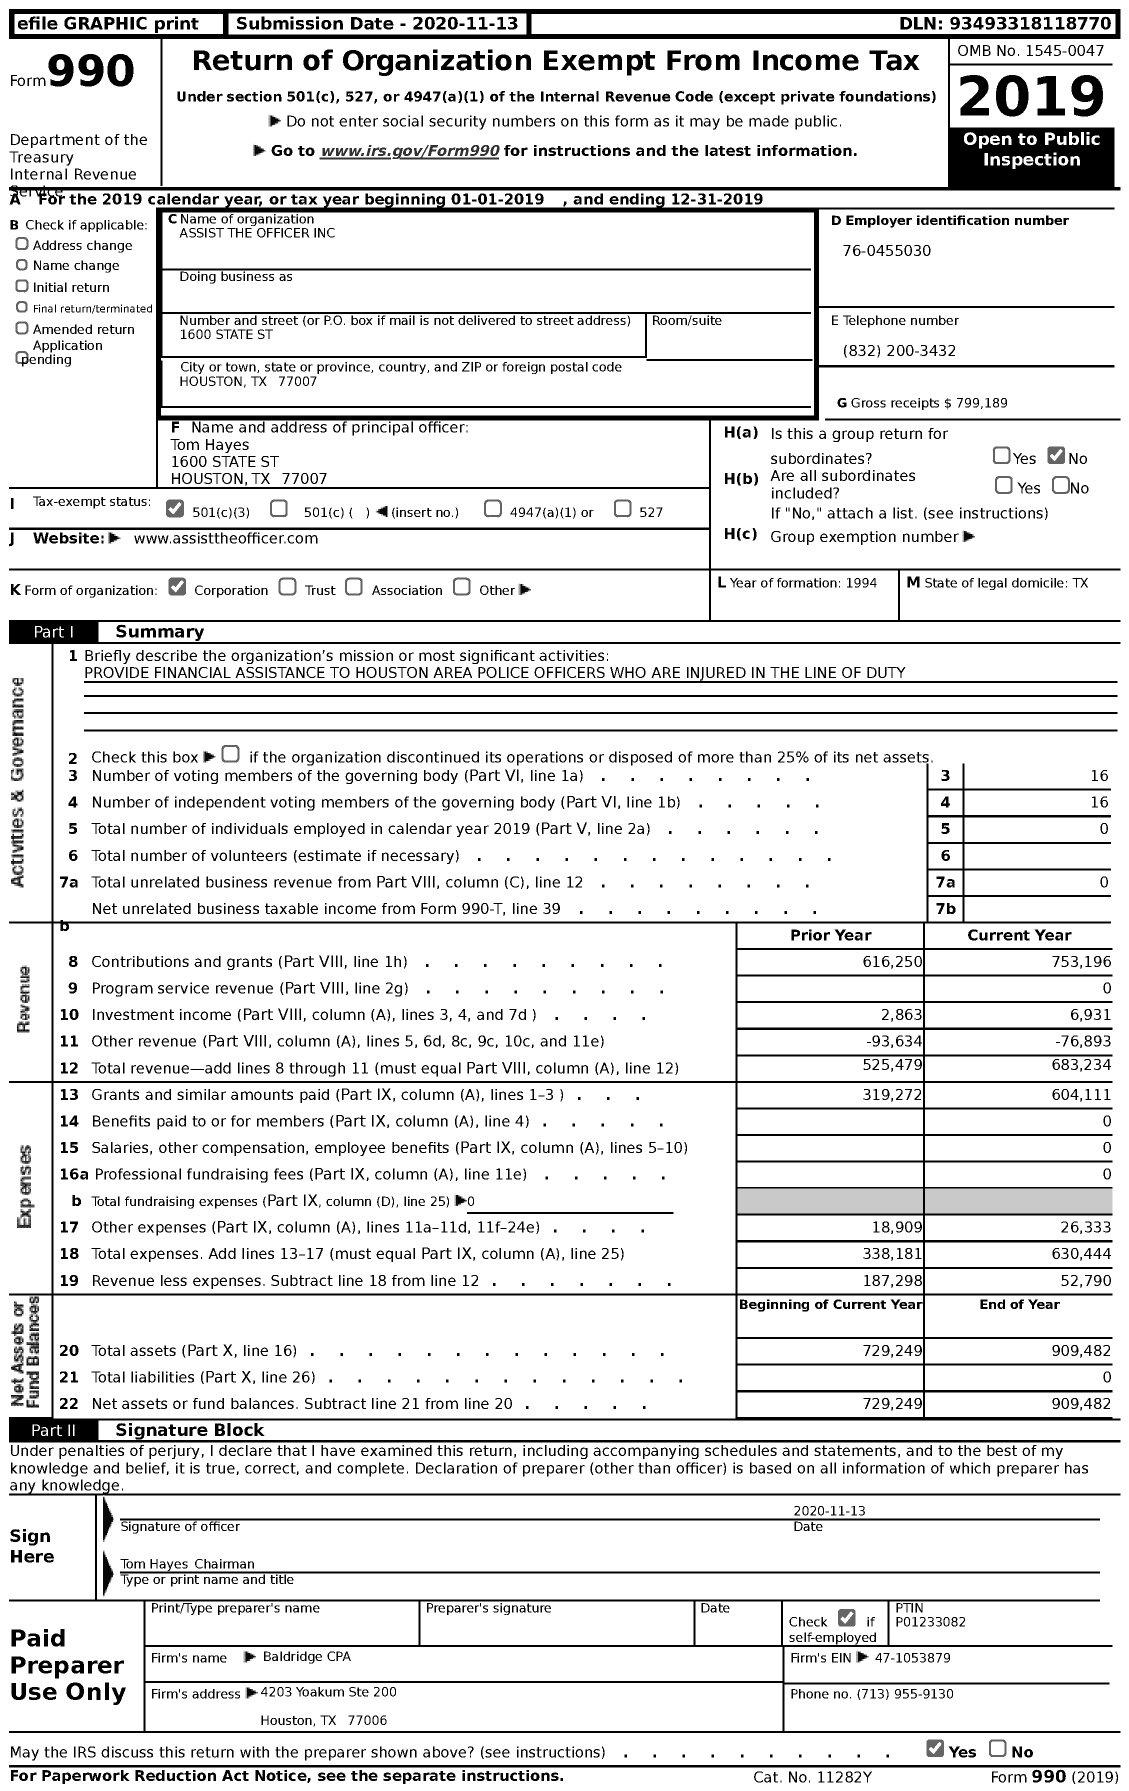 Image of first page of 2019 Form 990 for Assist the Officer